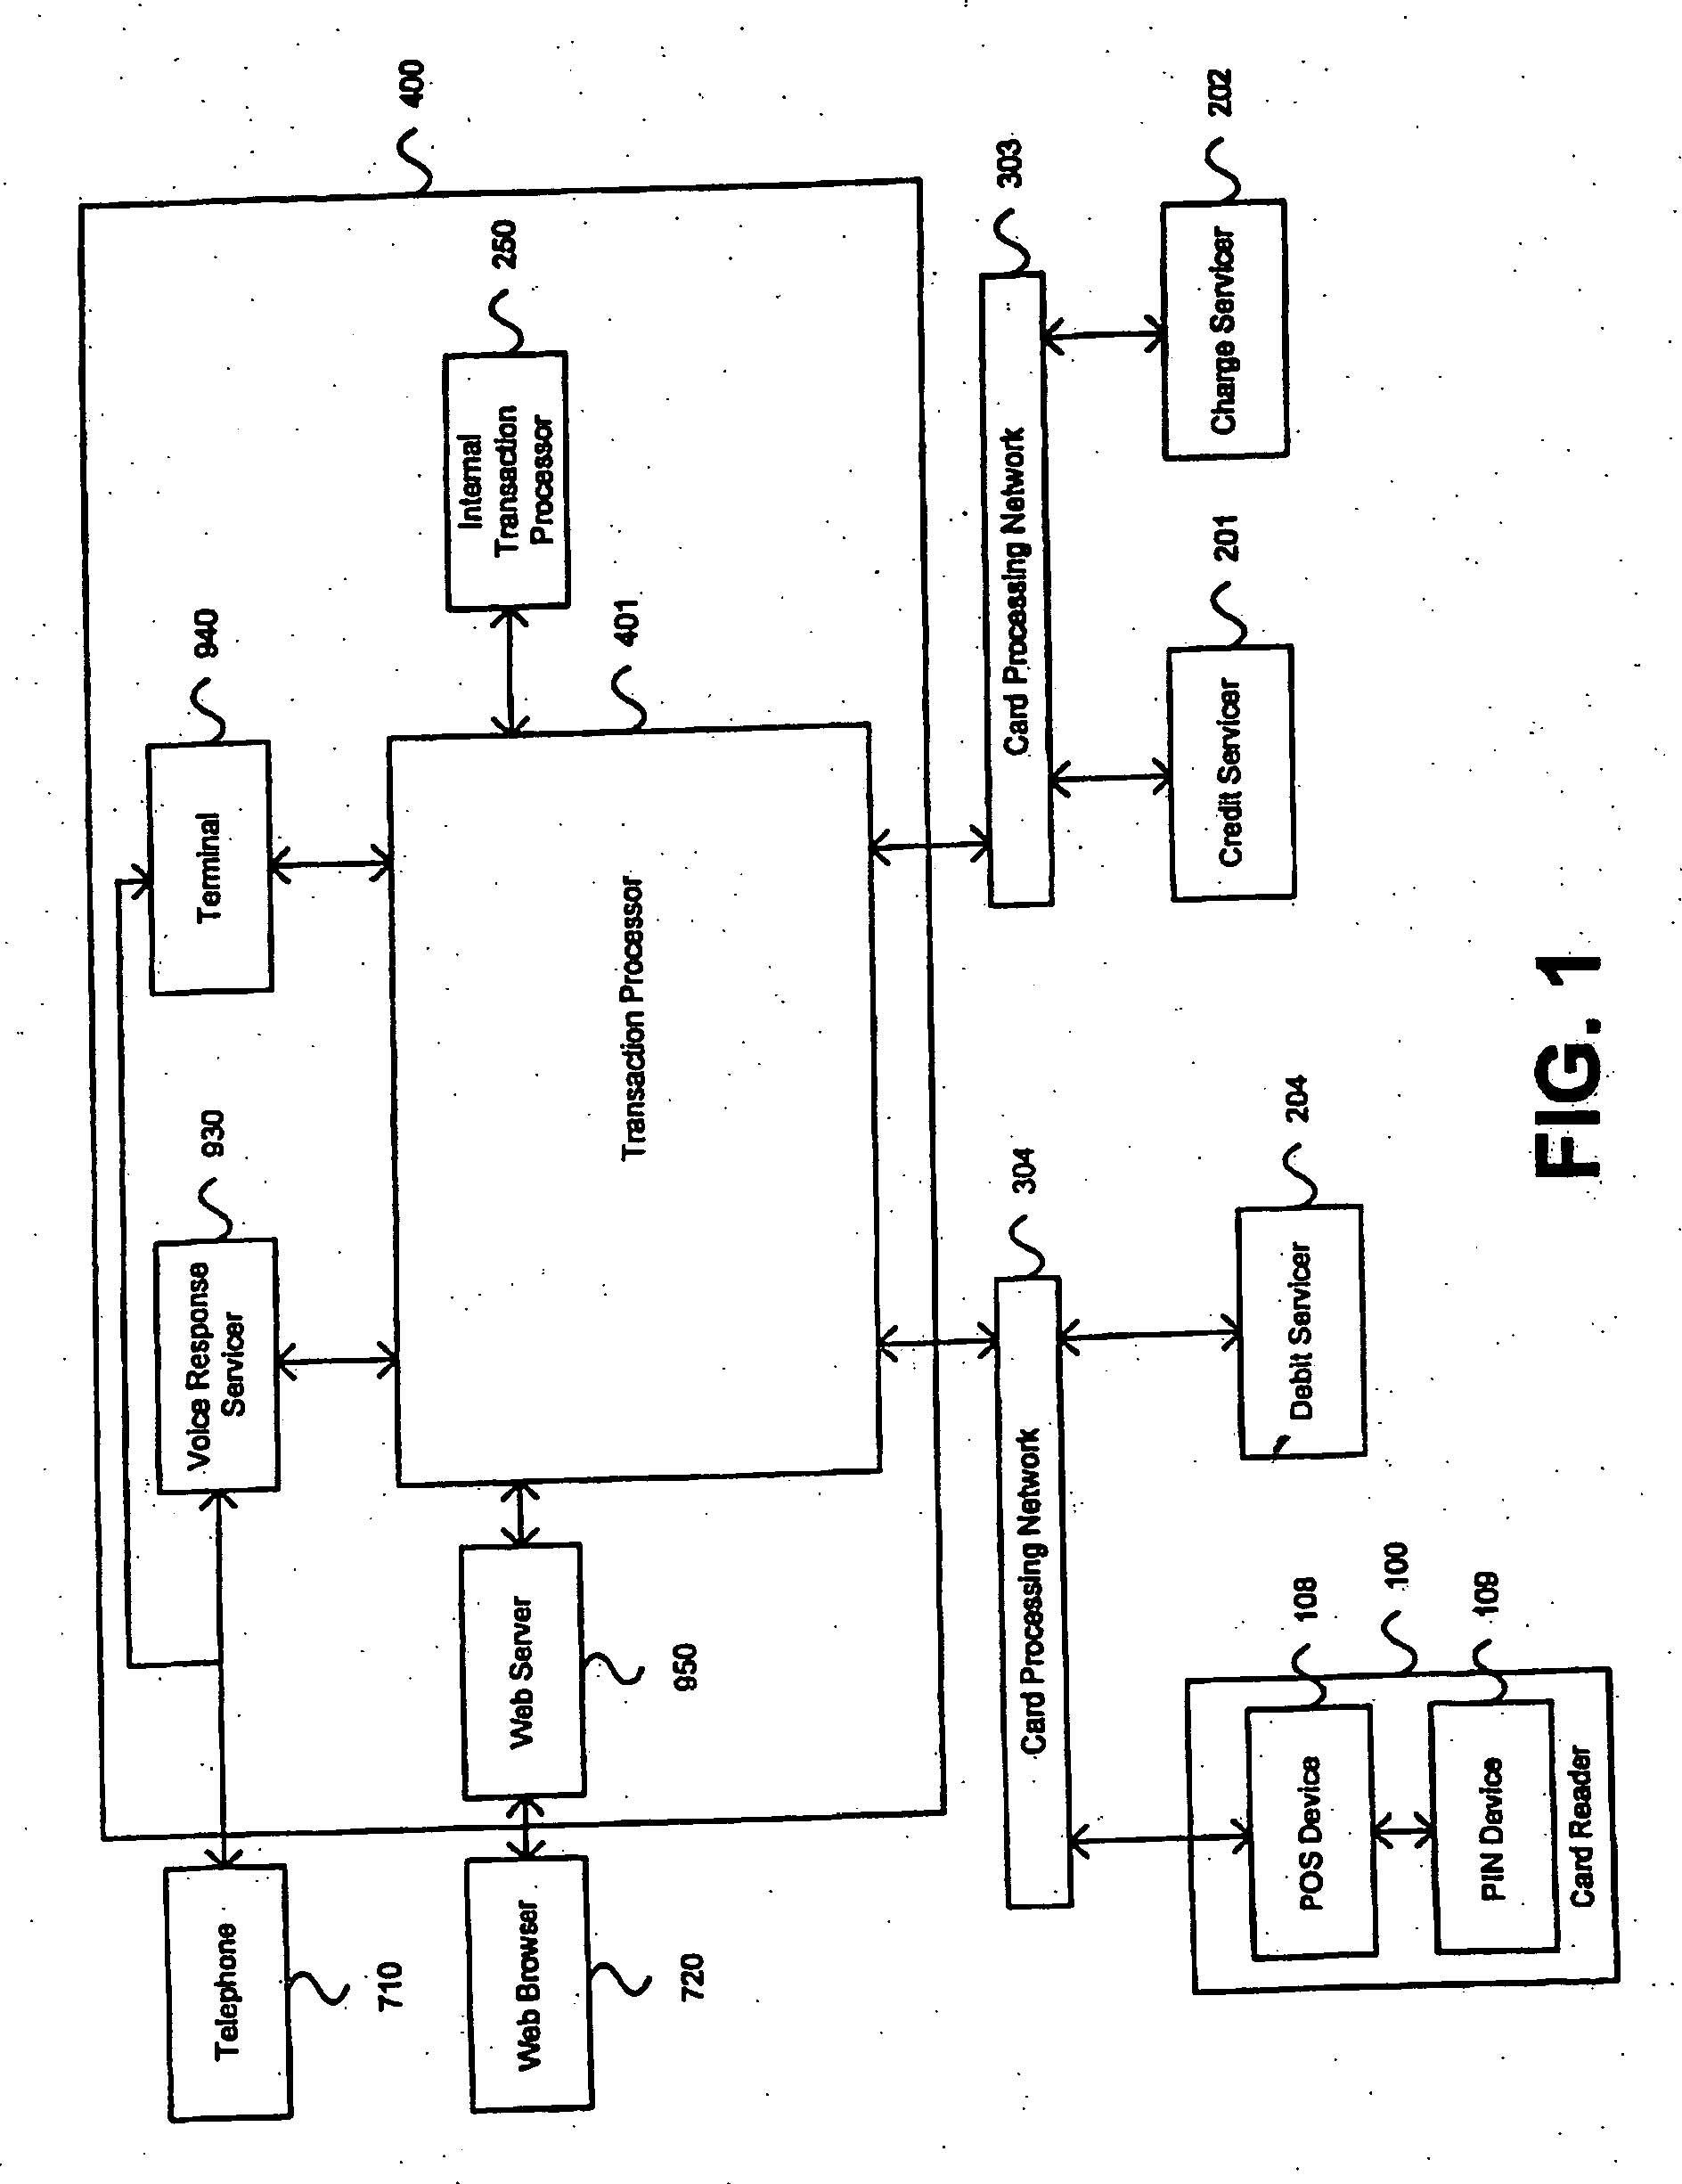 Multiple account preset parameter method, apparatus and systems for financial transactions and accounts